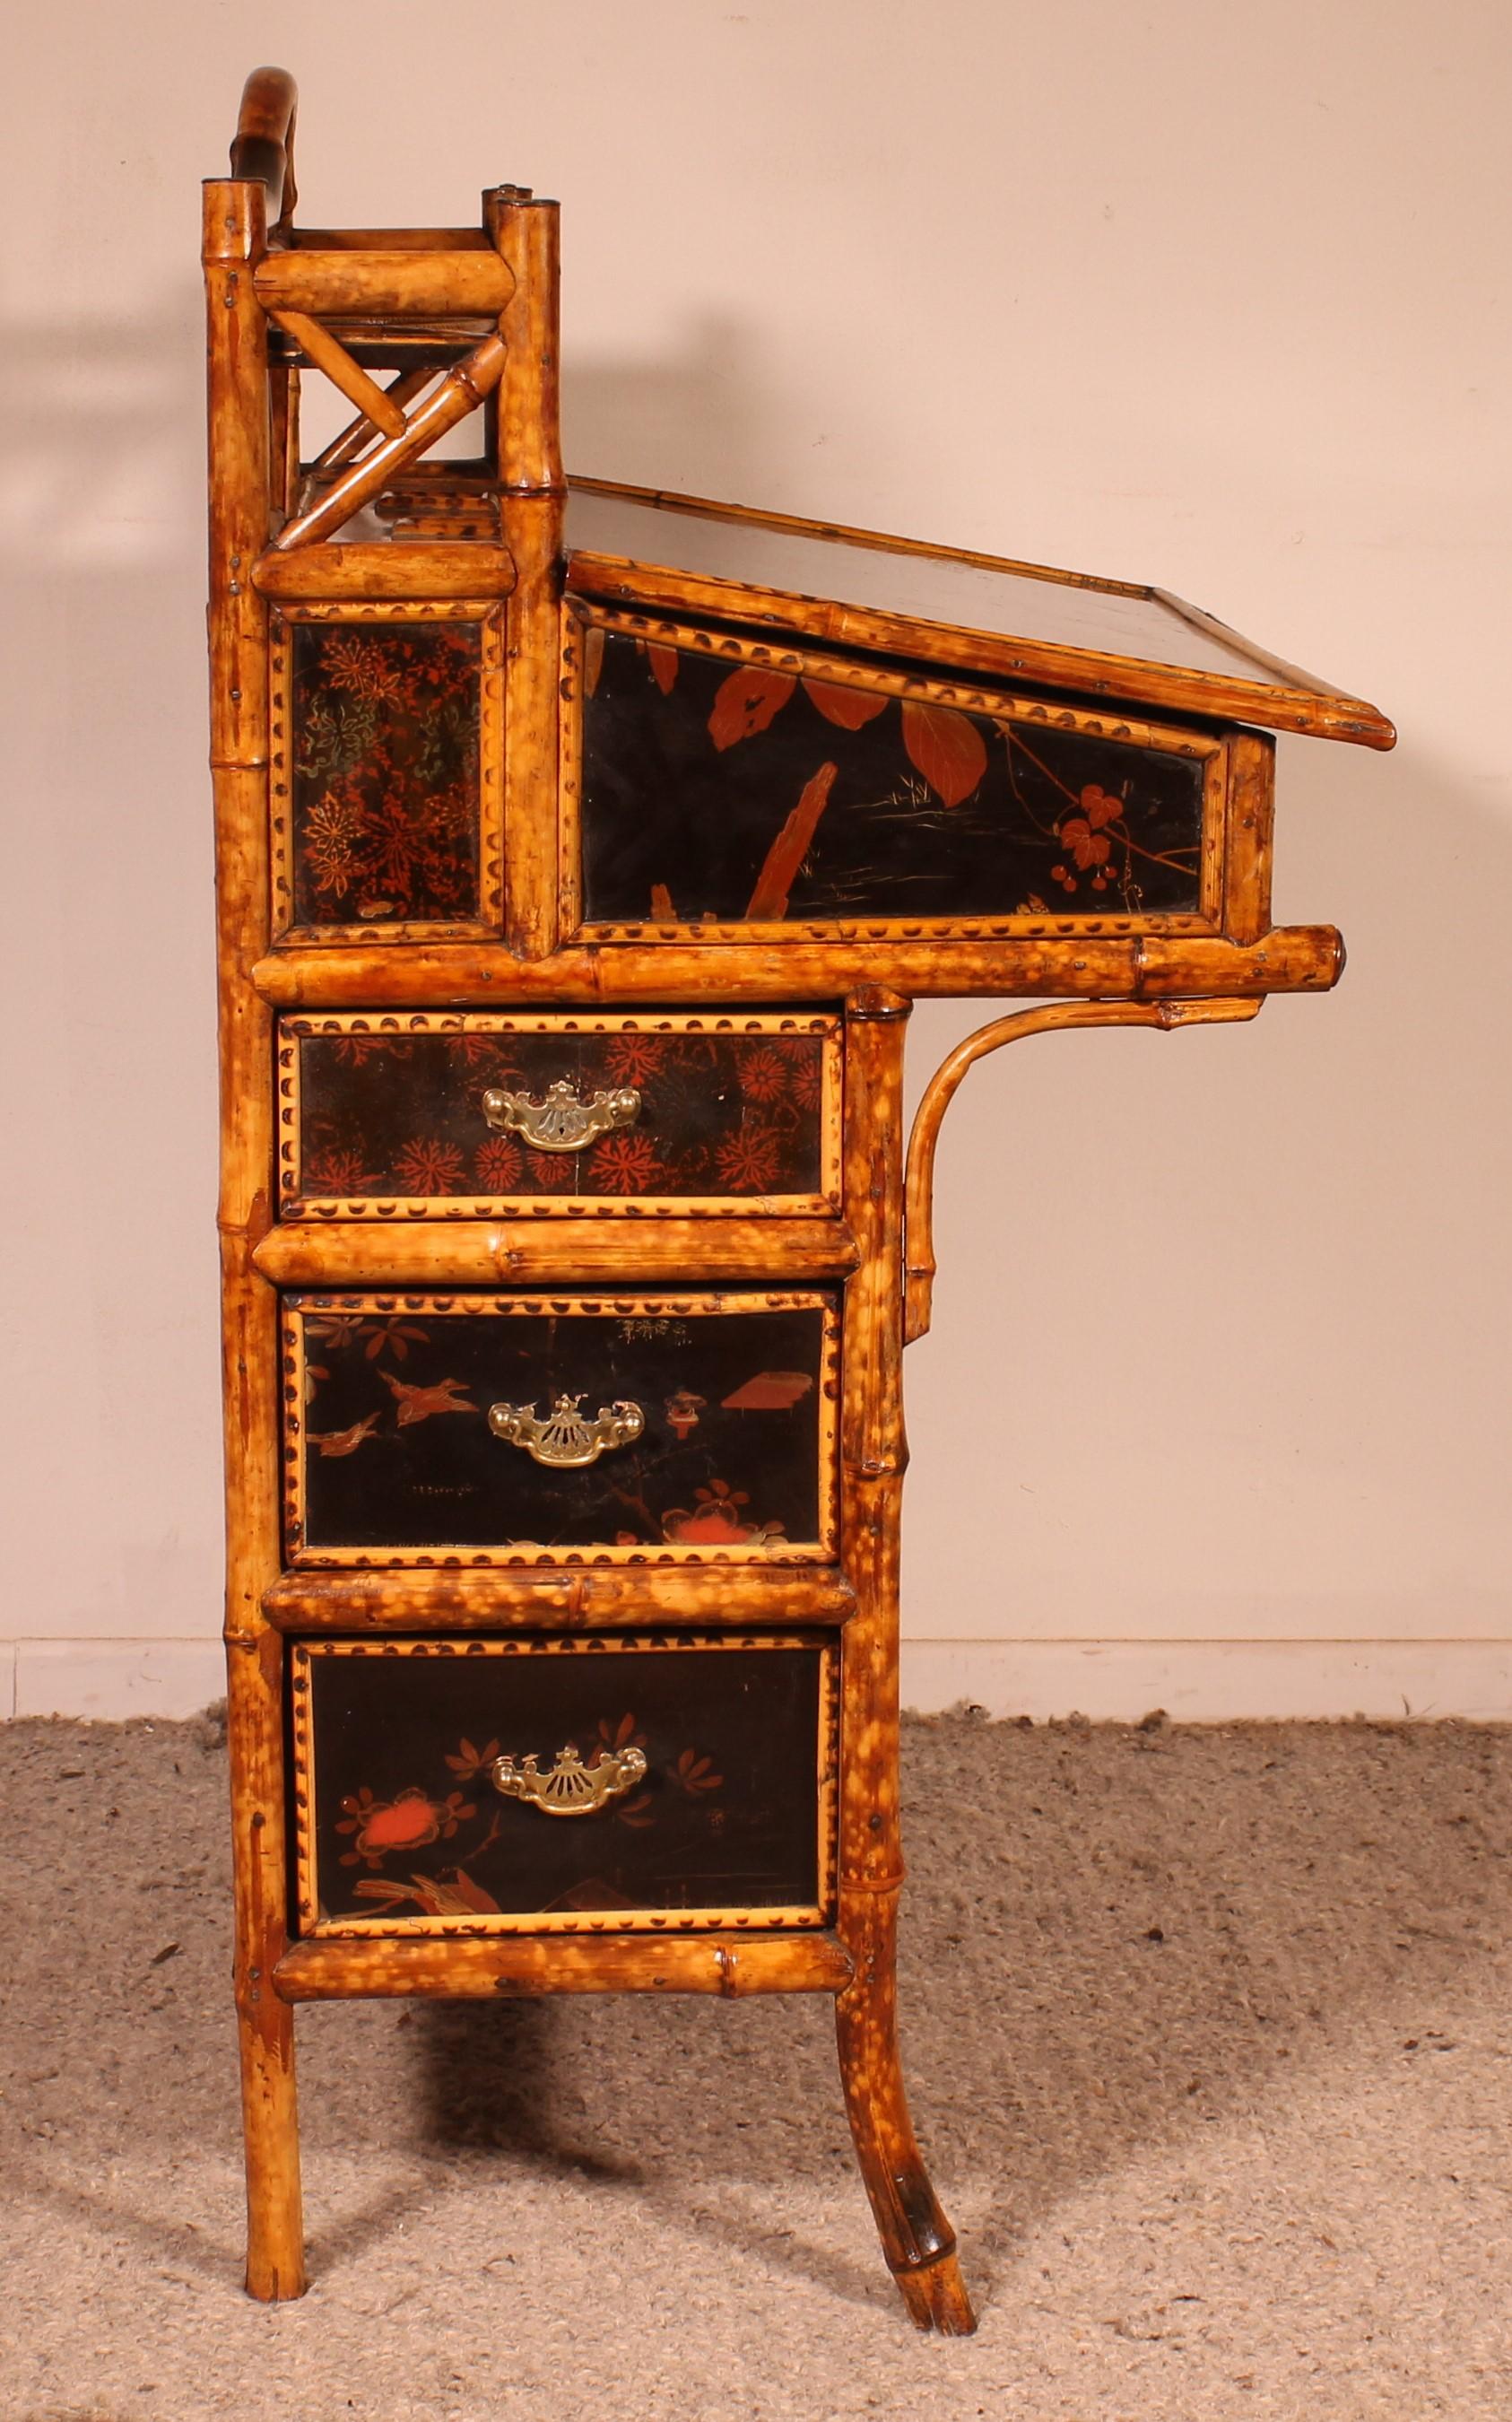 Secretary/davenport In Bamboo And Lacquer With Asian Decor - 19th Century For Sale 2